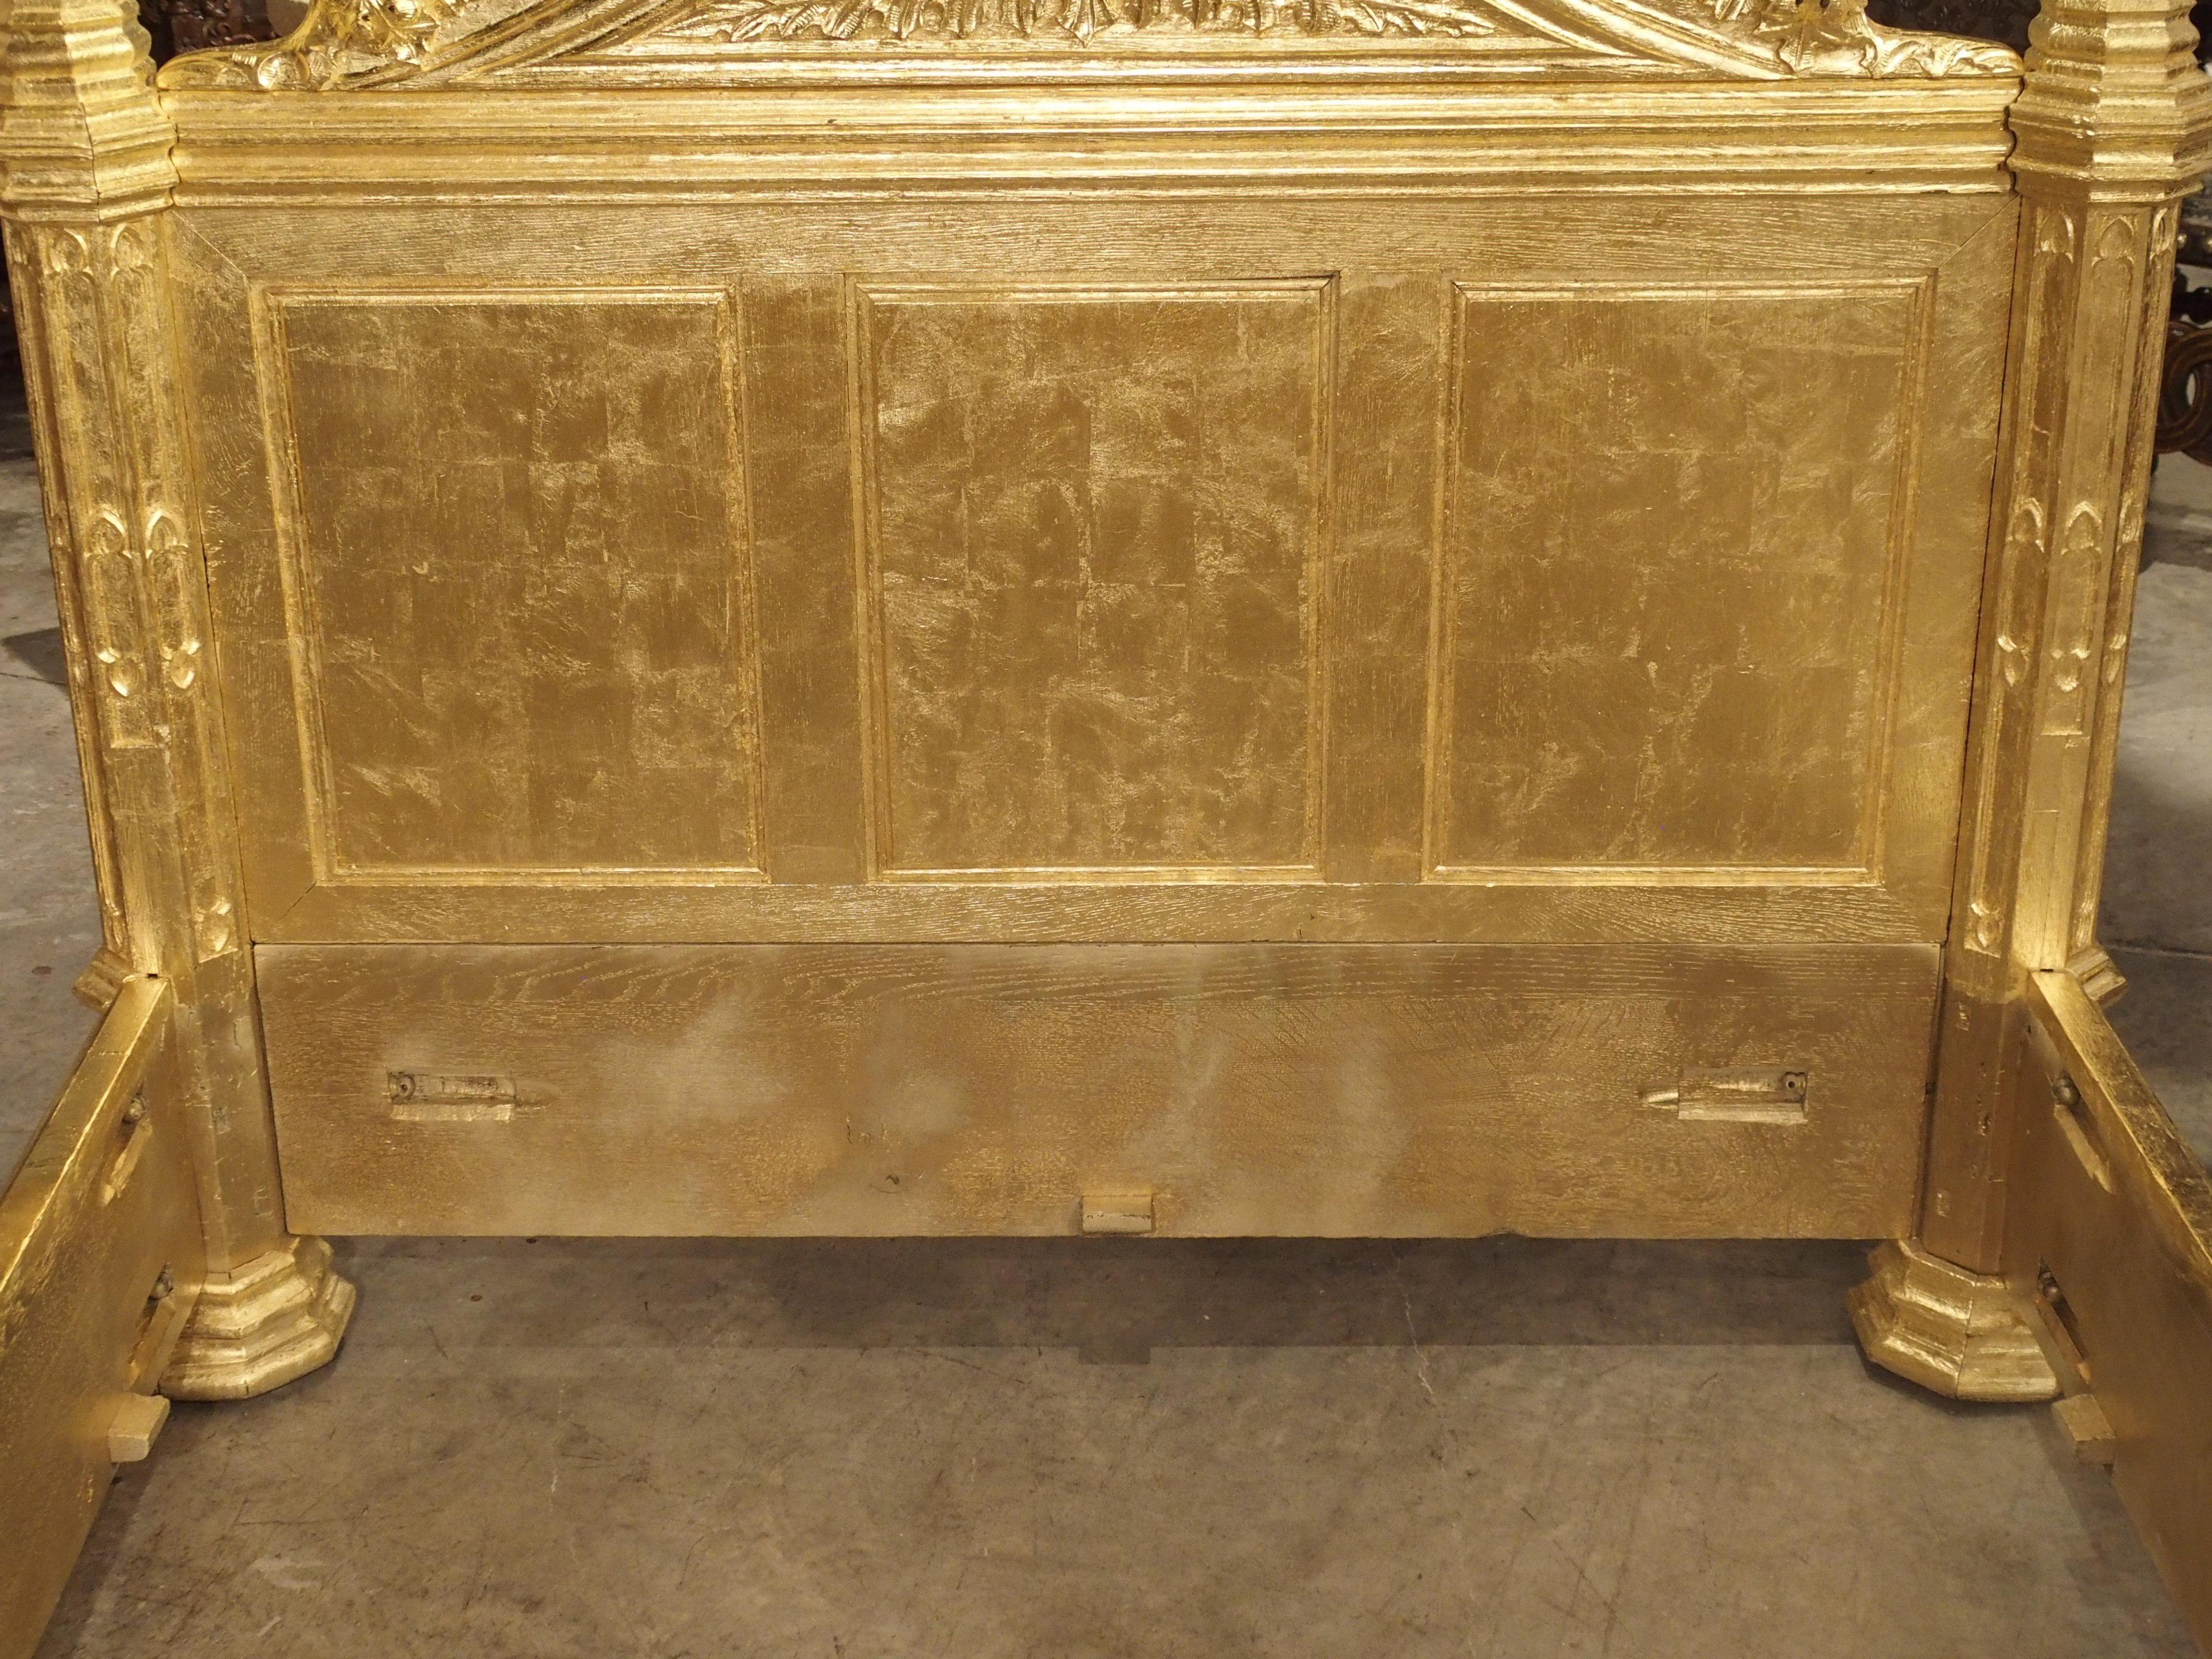 Magnificent Fully Carved Antique French Gothic Bed in 23.5-Karat Gold Leaf 1